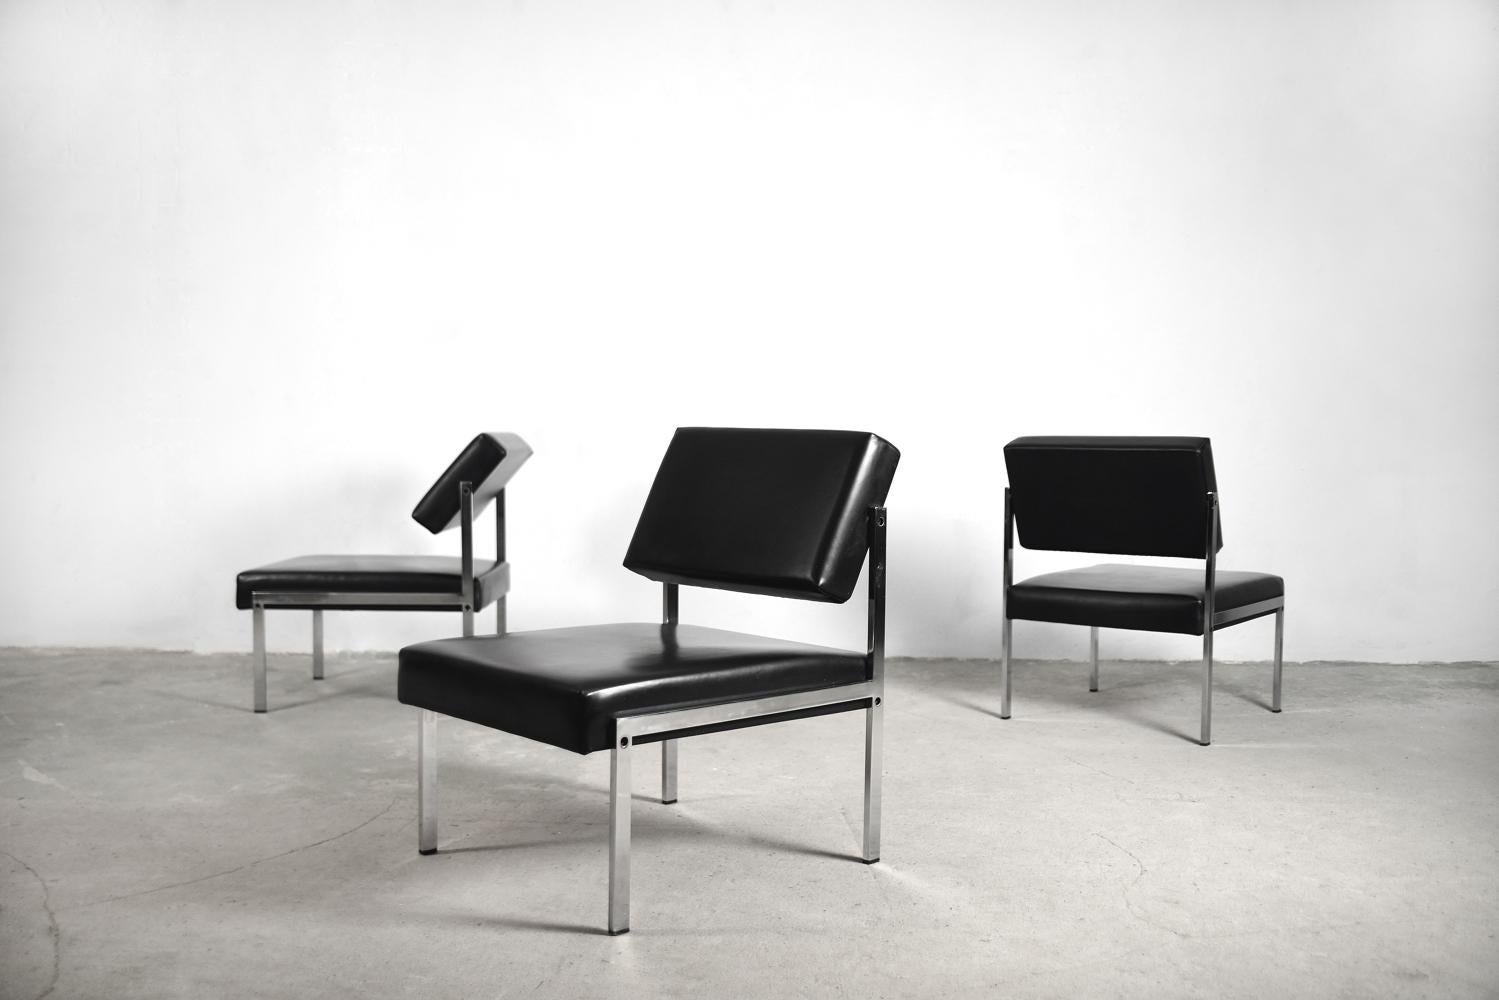 20th Century Minimalist German Chrome and Leather Modular Lounge Chairs from Brune, 1960s For Sale